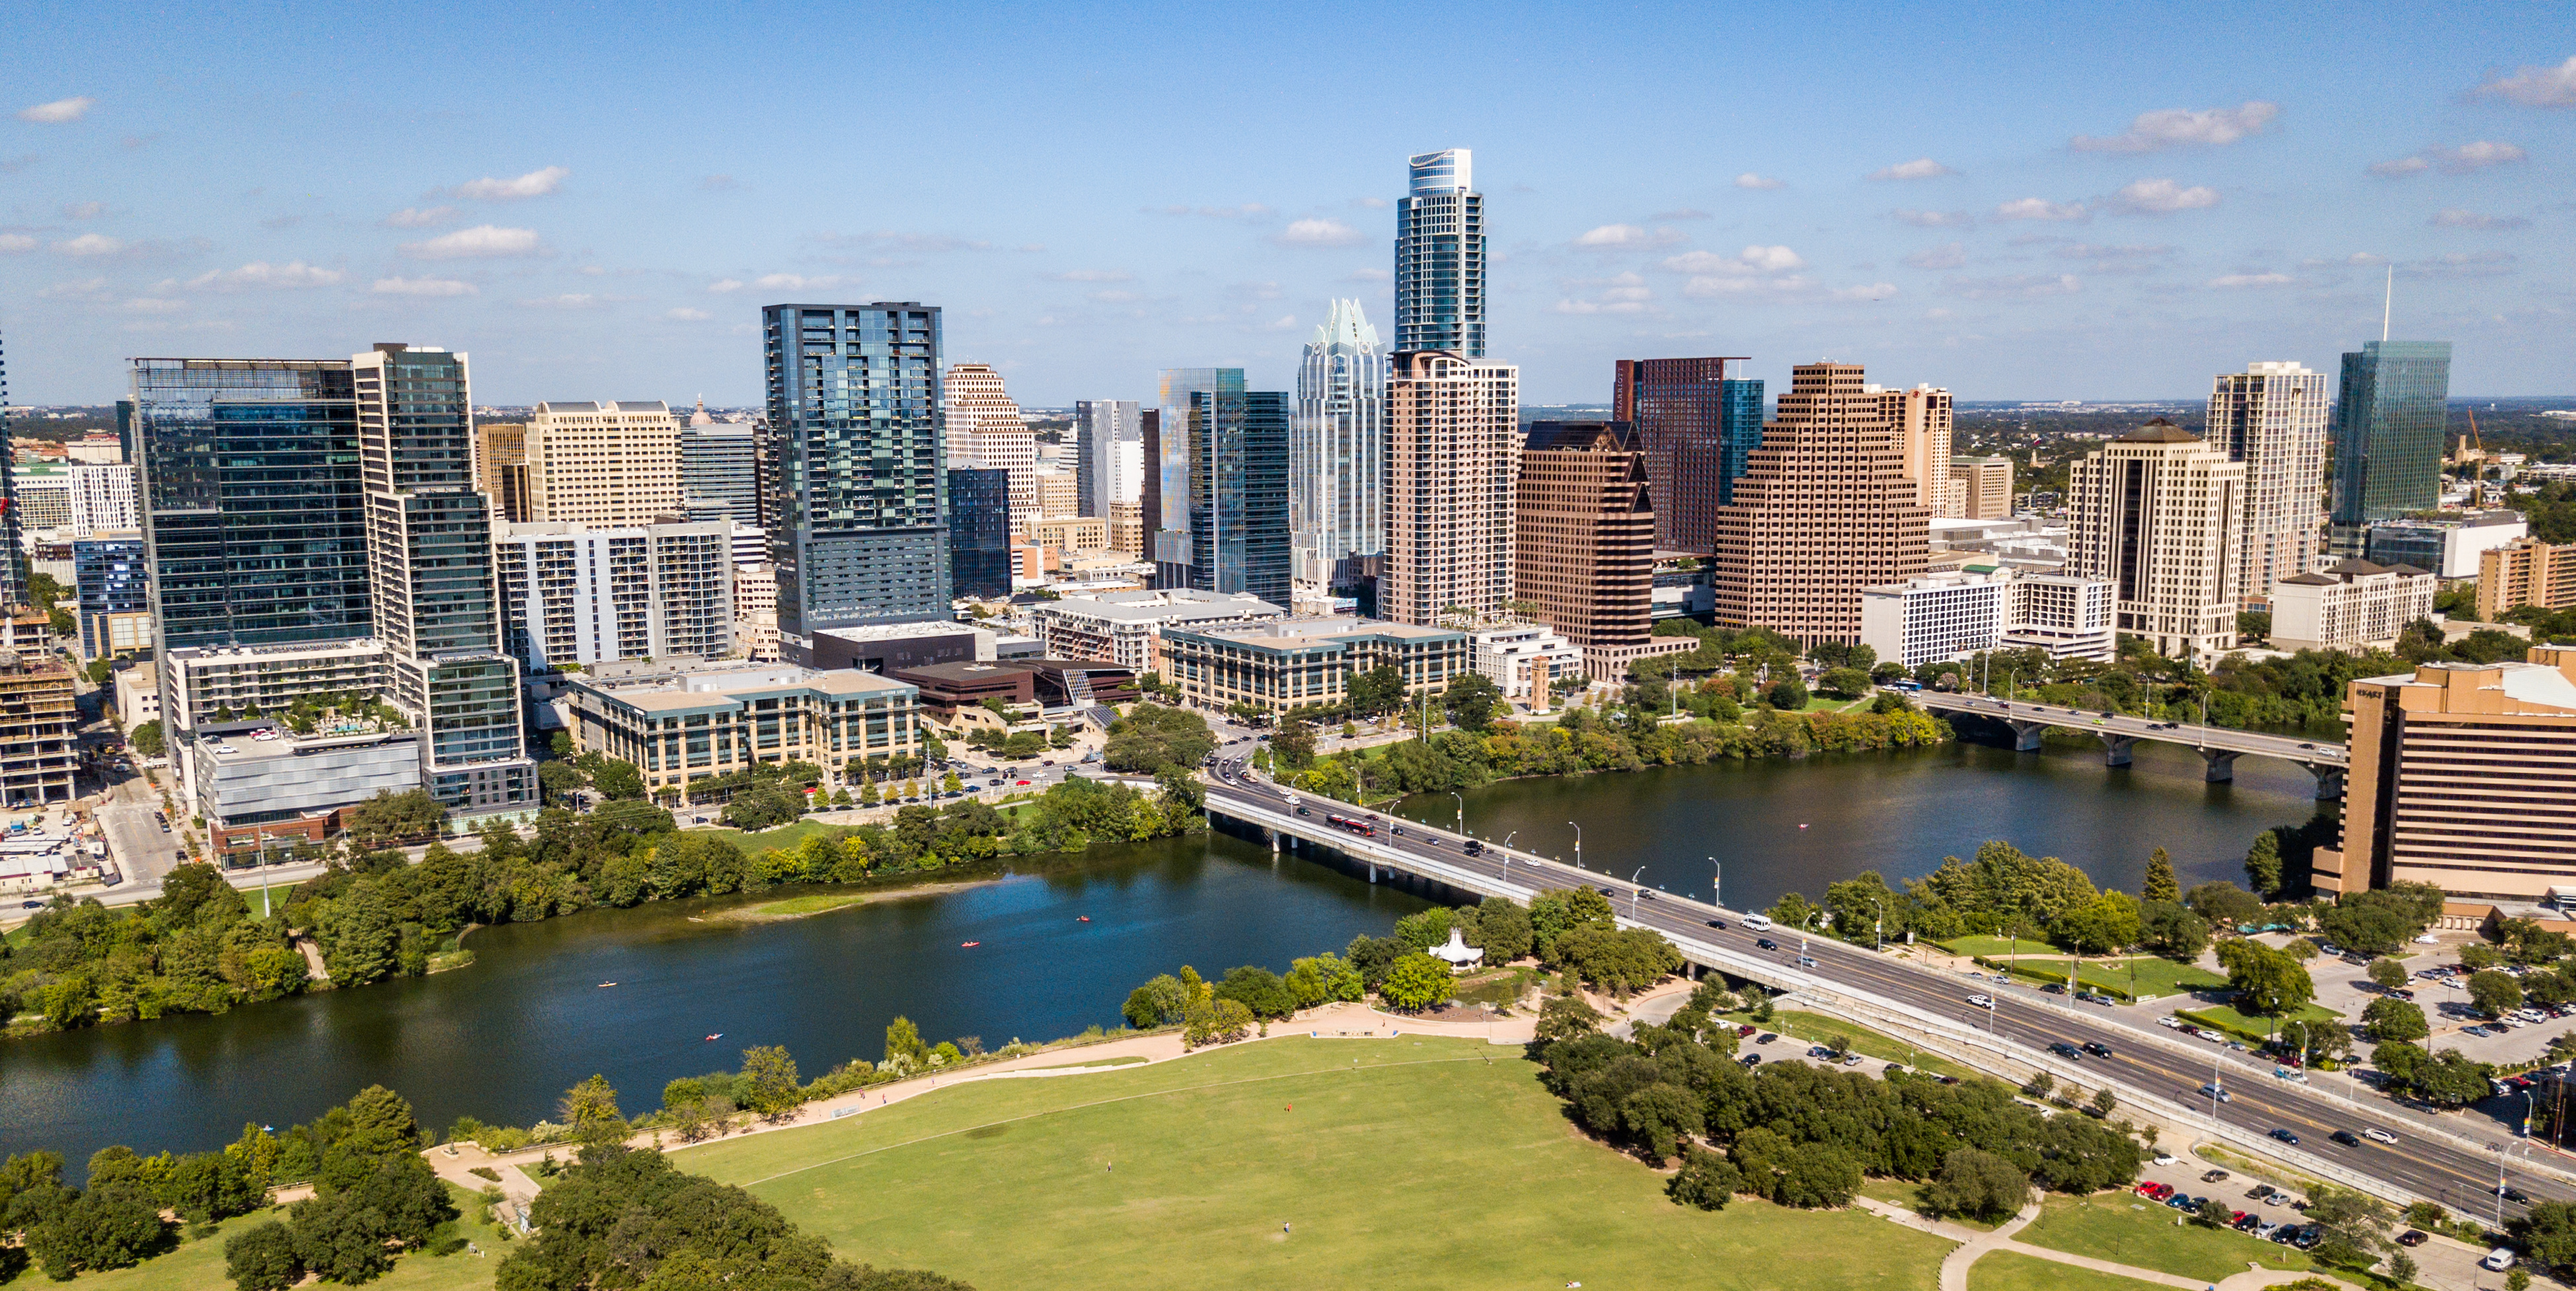 Austin Commercial Real Estate Trends & Intelligence CRE